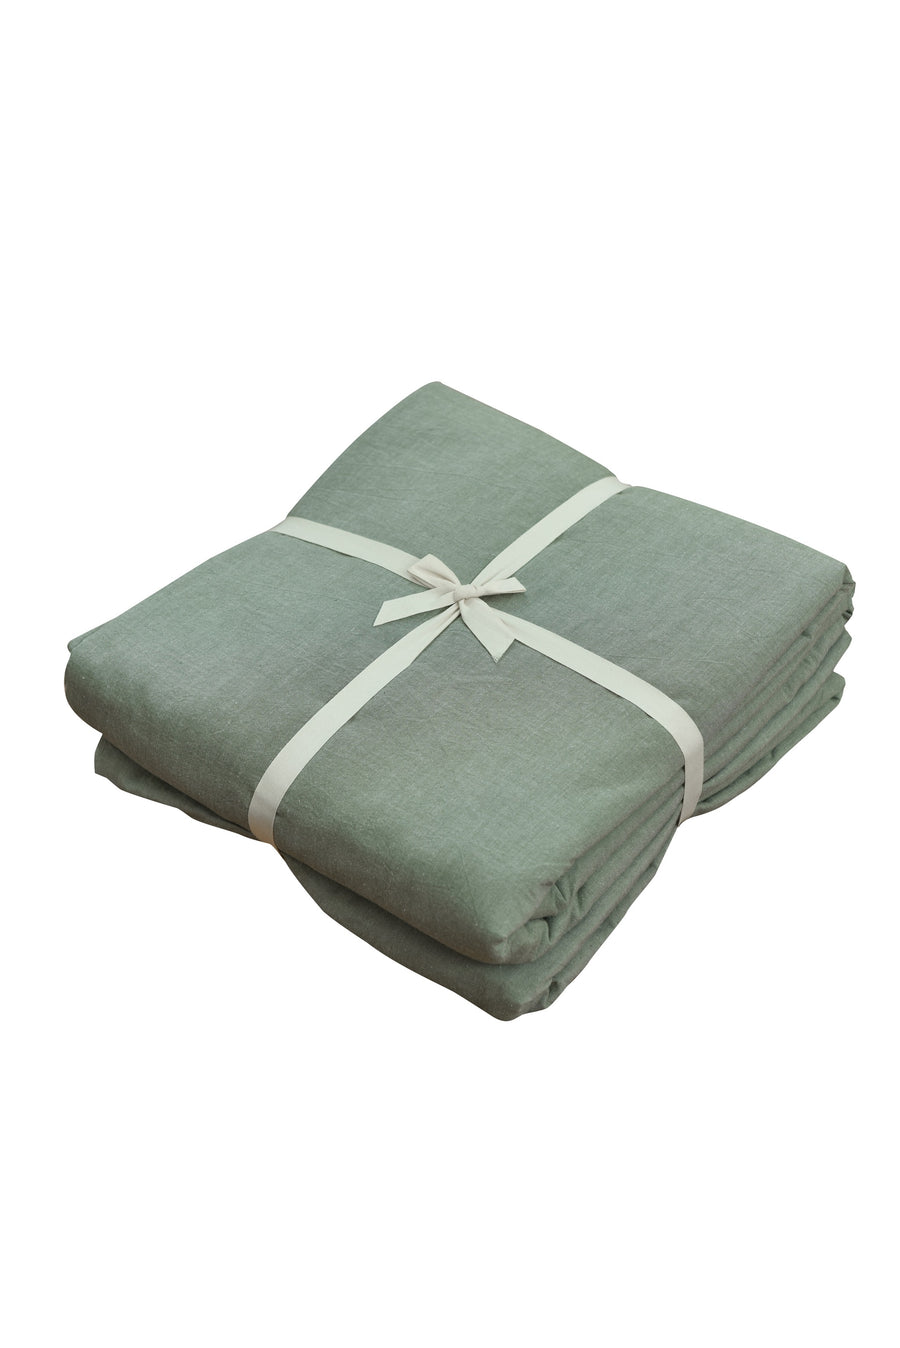 Gavy Q 5-pc Quilt Cover Set (Spring Green)